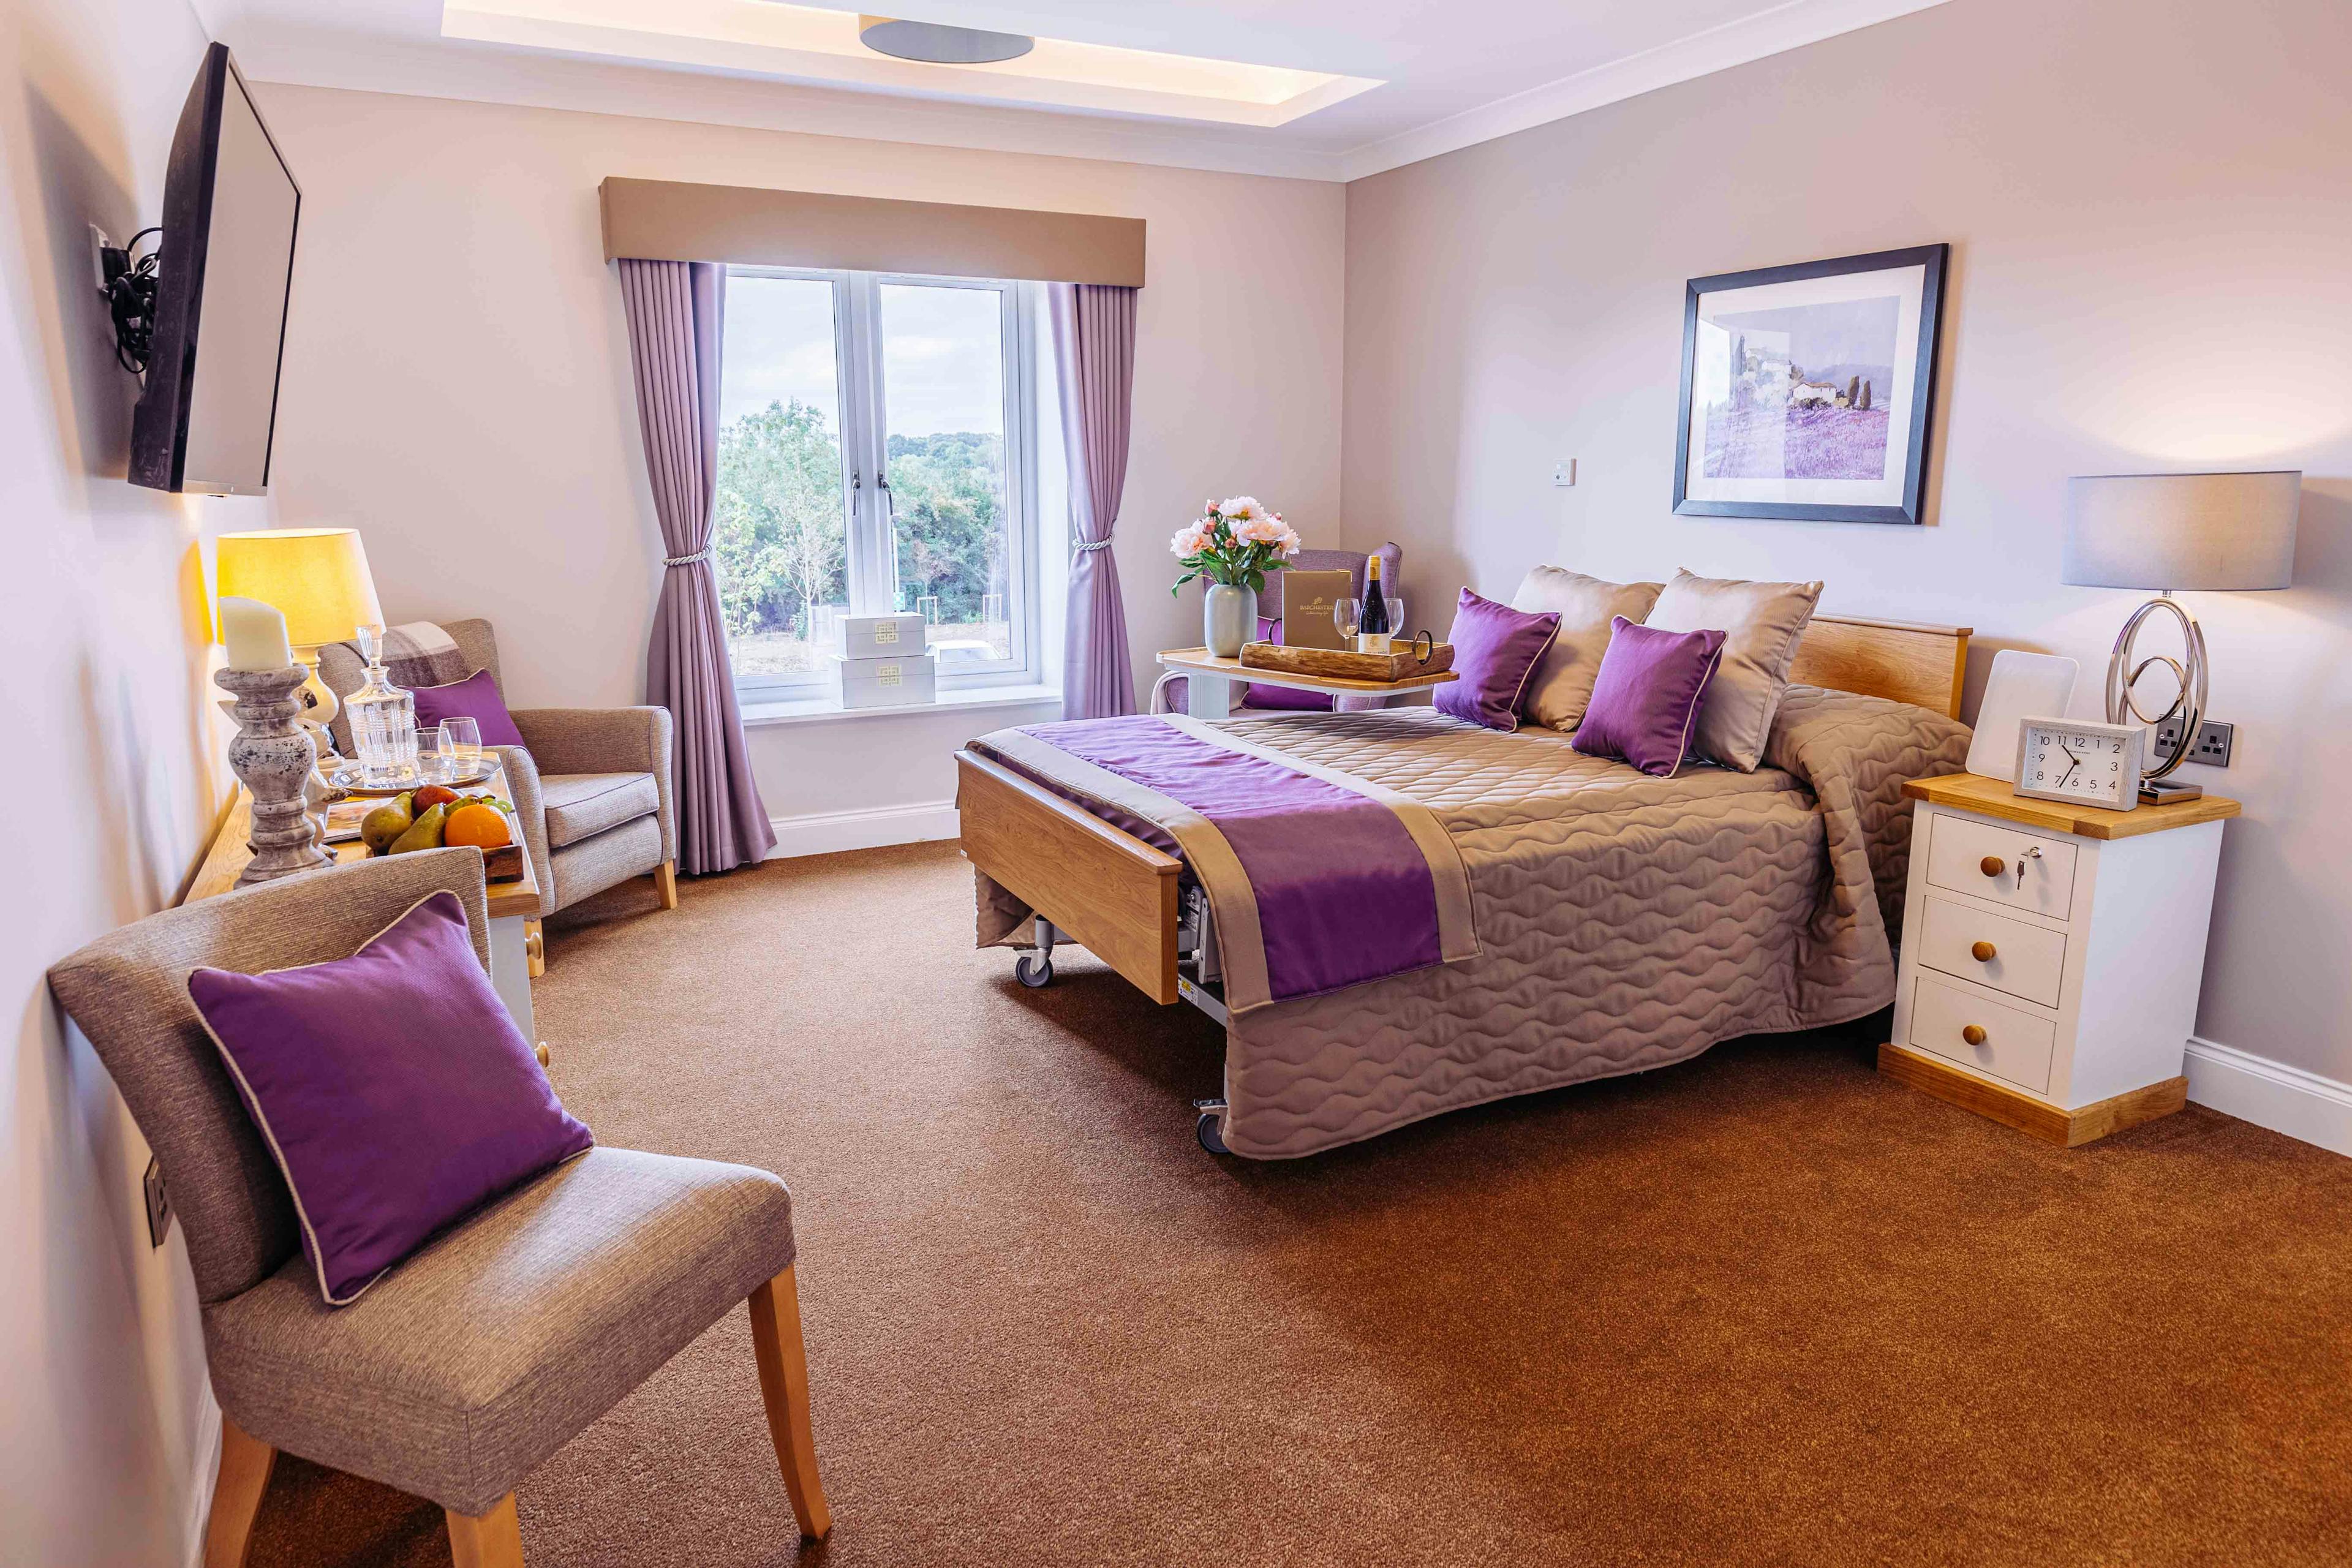 Bedroom at Bere Grove Care Home in Horndean, East Hampshire